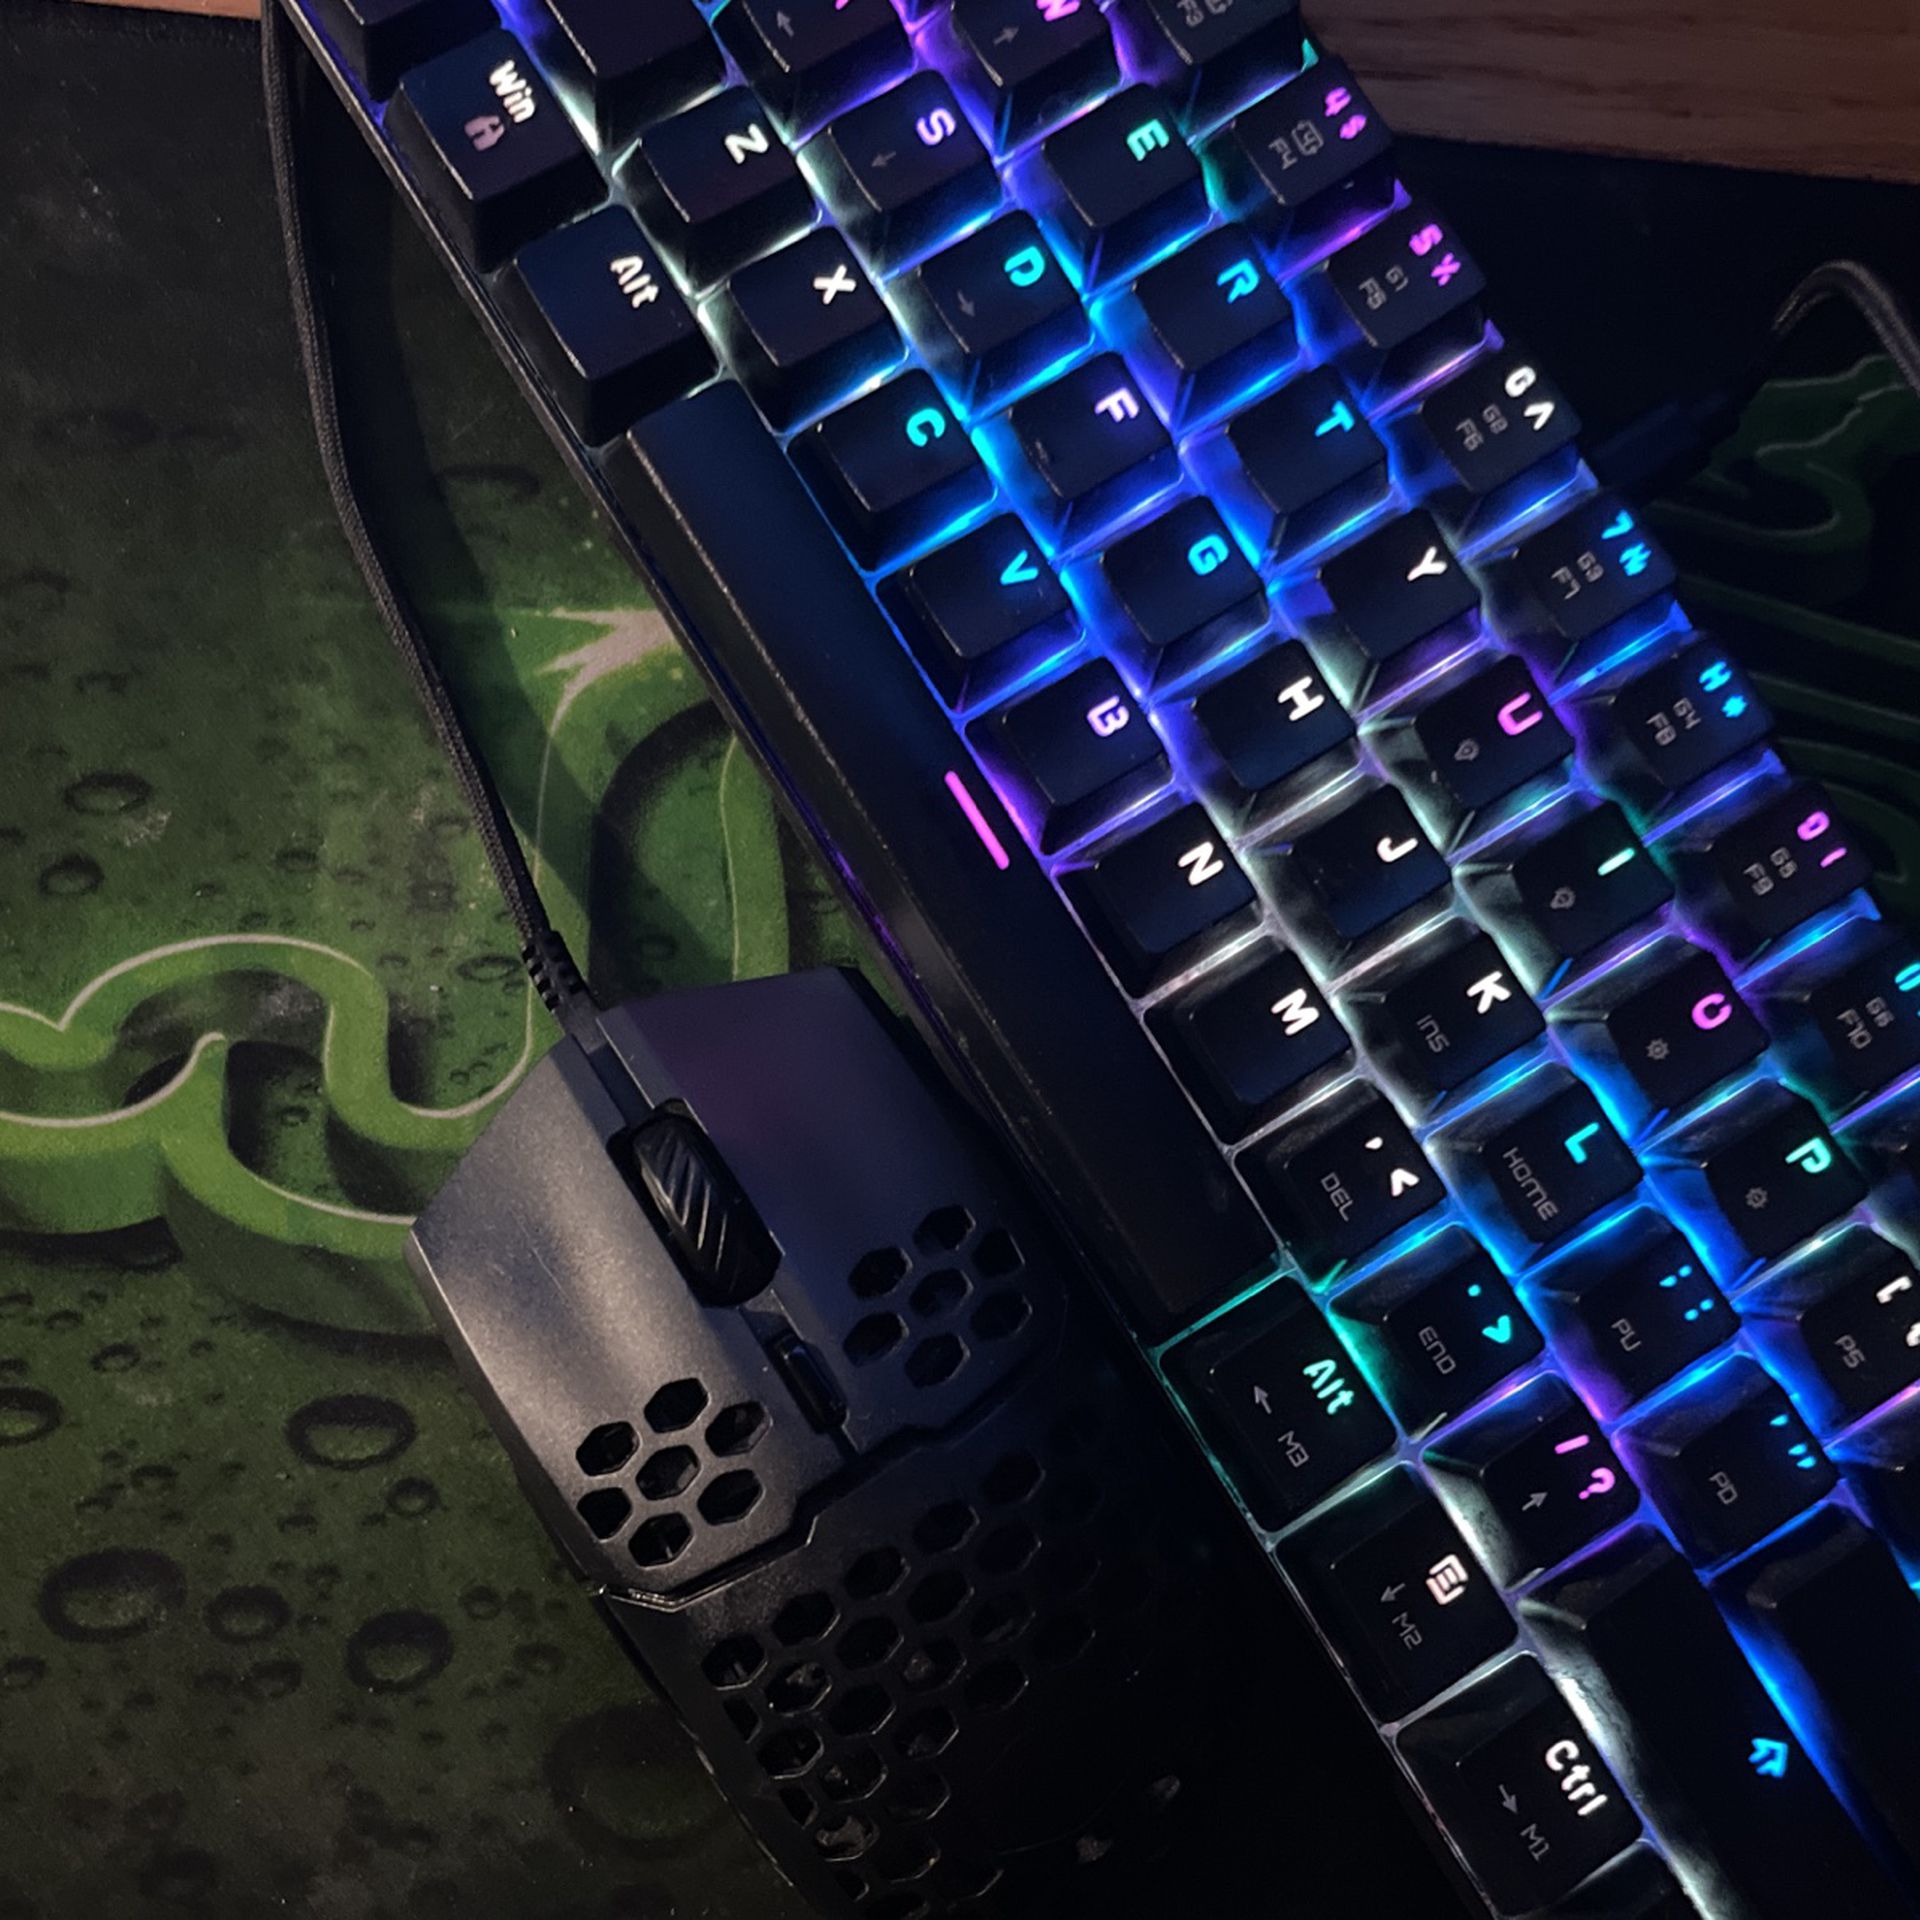 Cooler Master Mouse And Ck61  Keyboard,